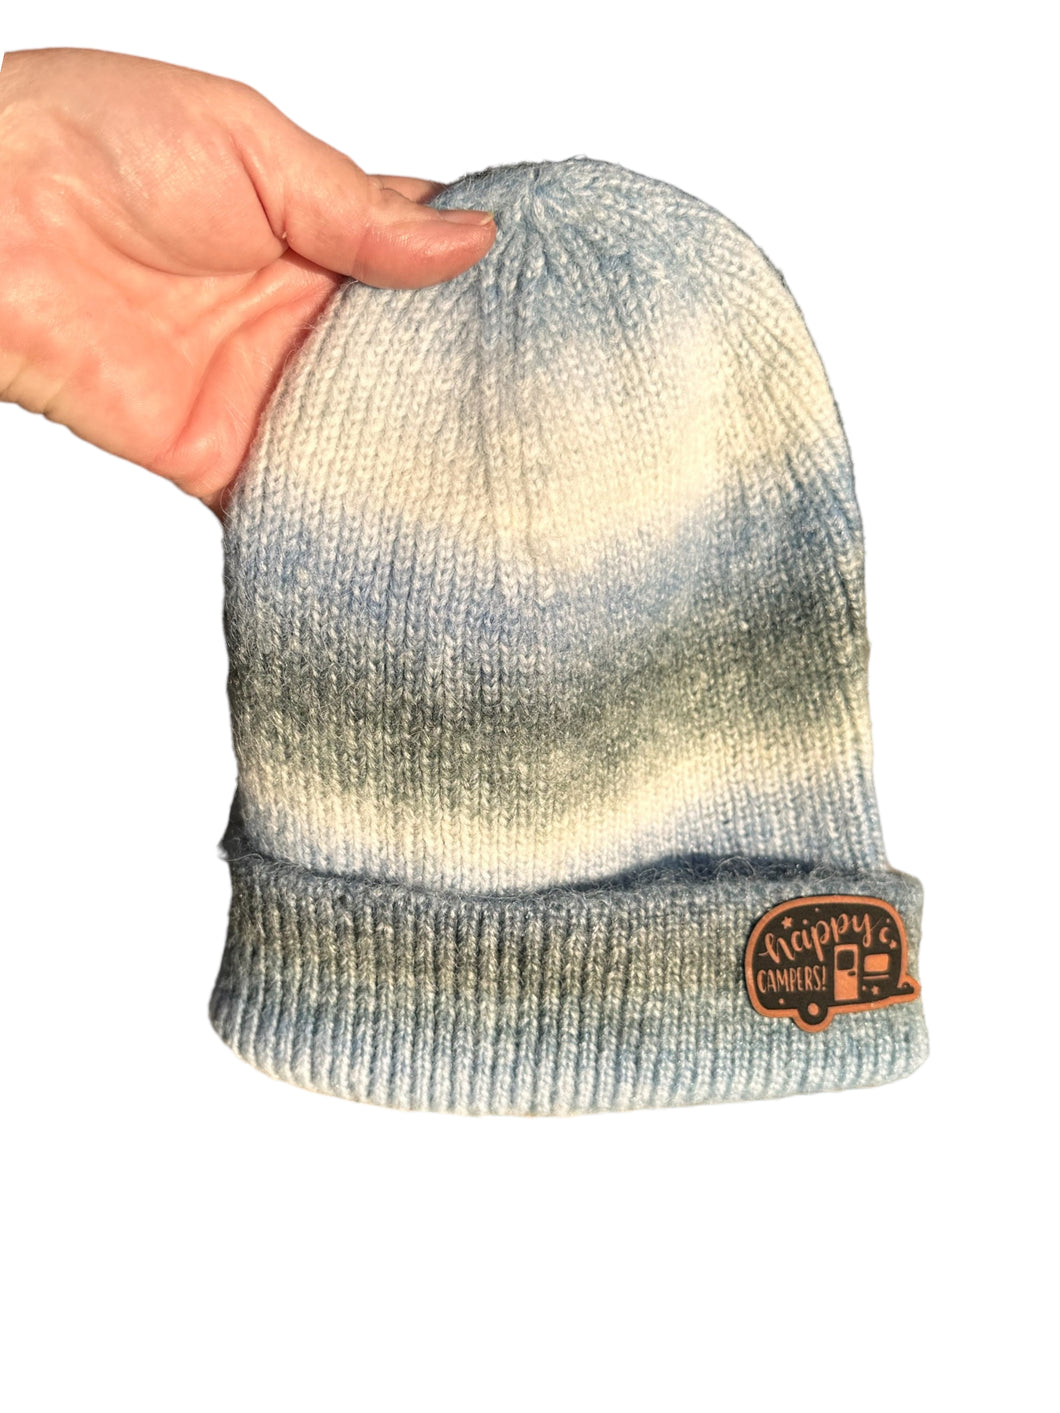 Blue, White, and Grey Ombre Knit Beanie W/ Leather Patch